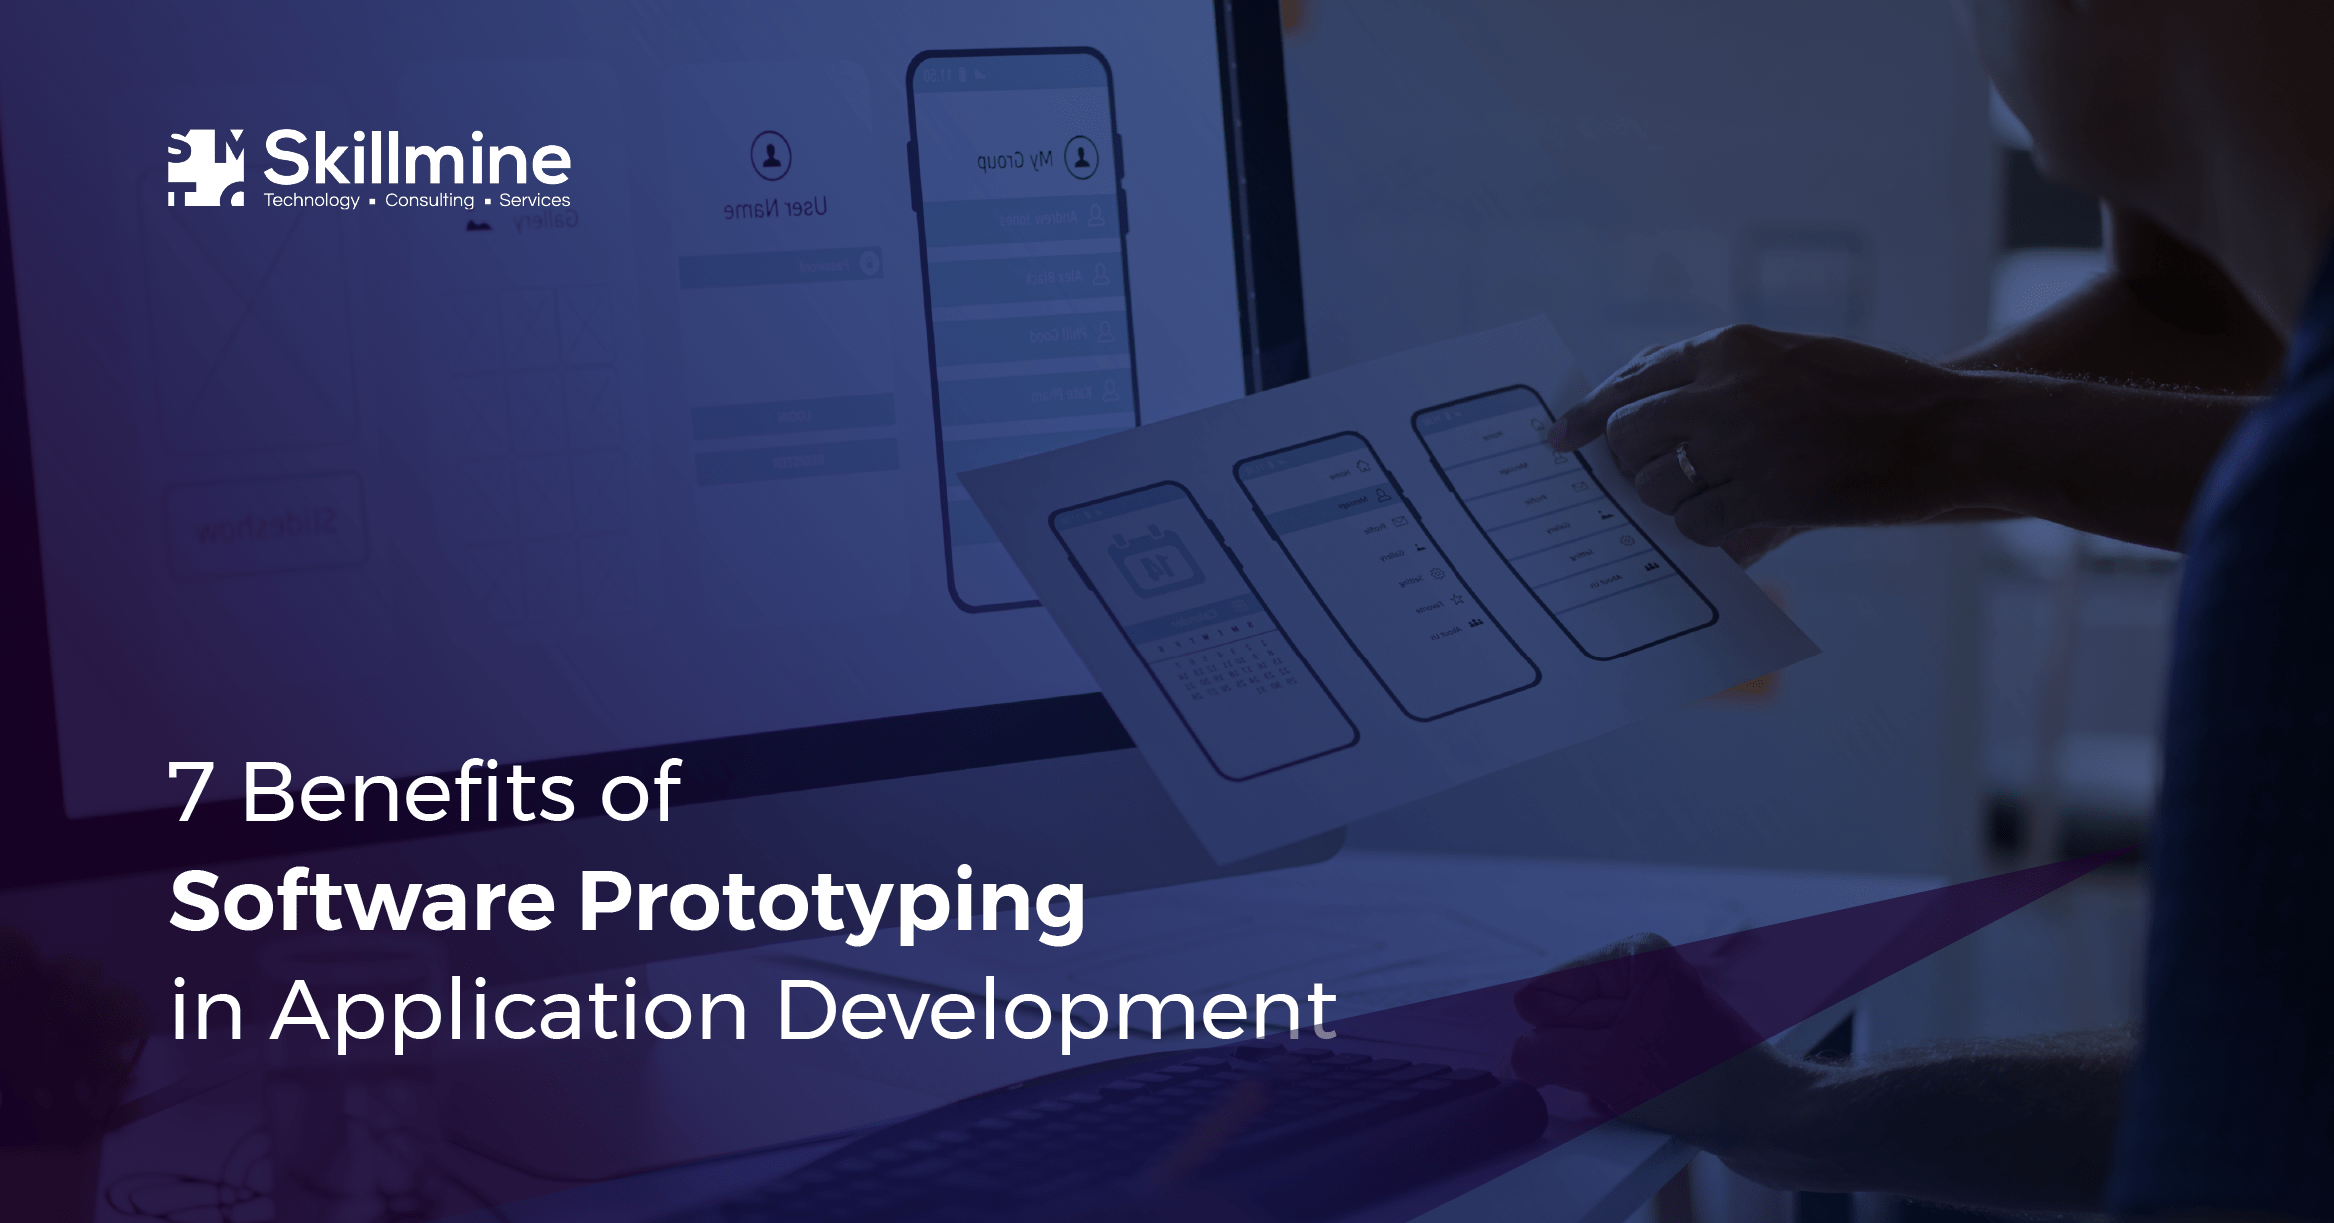 7 Benefits of Software Prototyping in Application Development